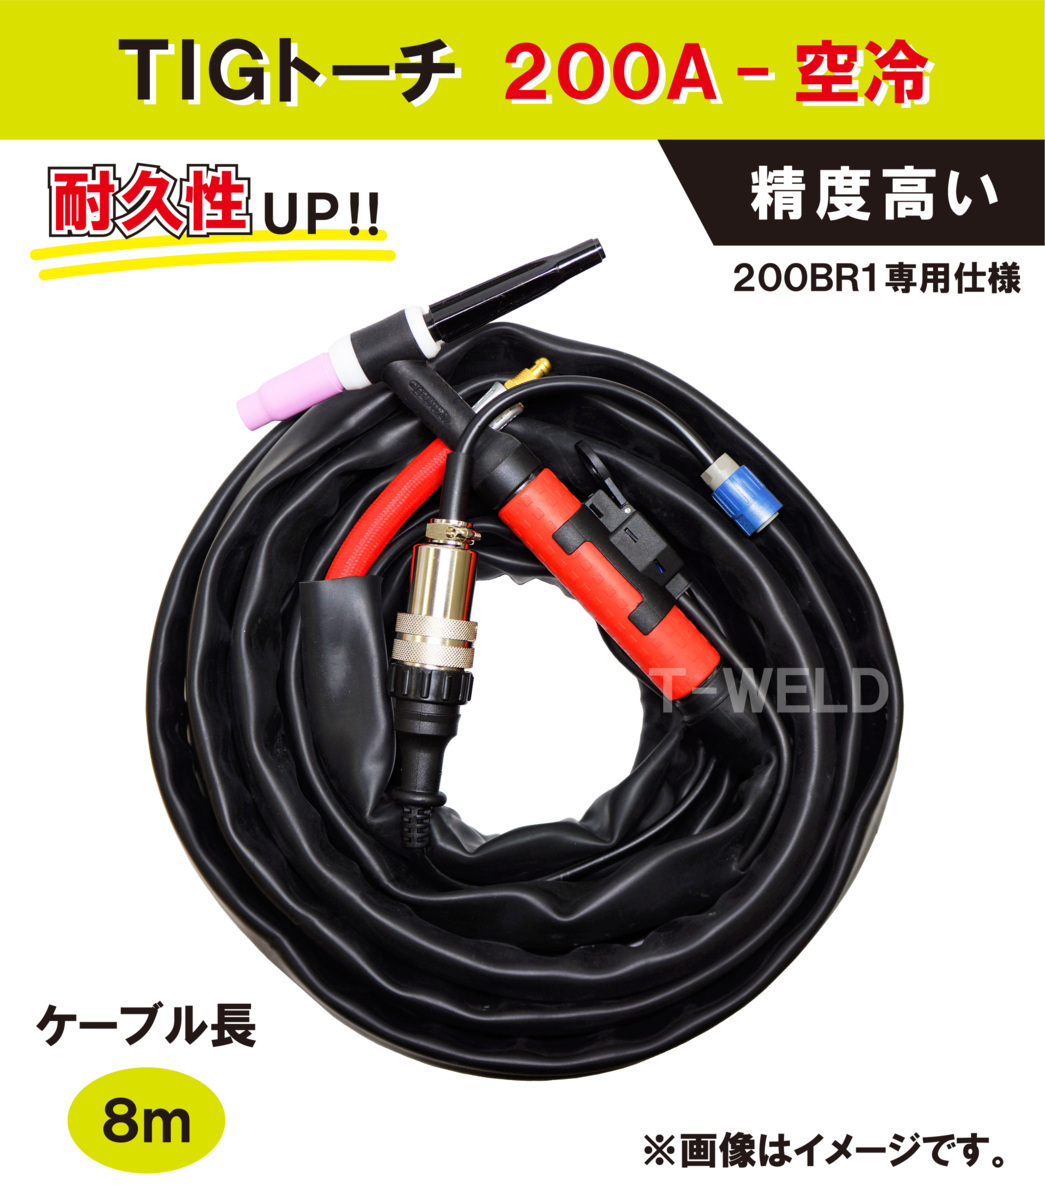 TIG トーチ 200A 空冷 PANA 200BR1 専用仕様× 8m （精度高い）制御ケーブル組 TWX00018 付き　1本単価　限定商品